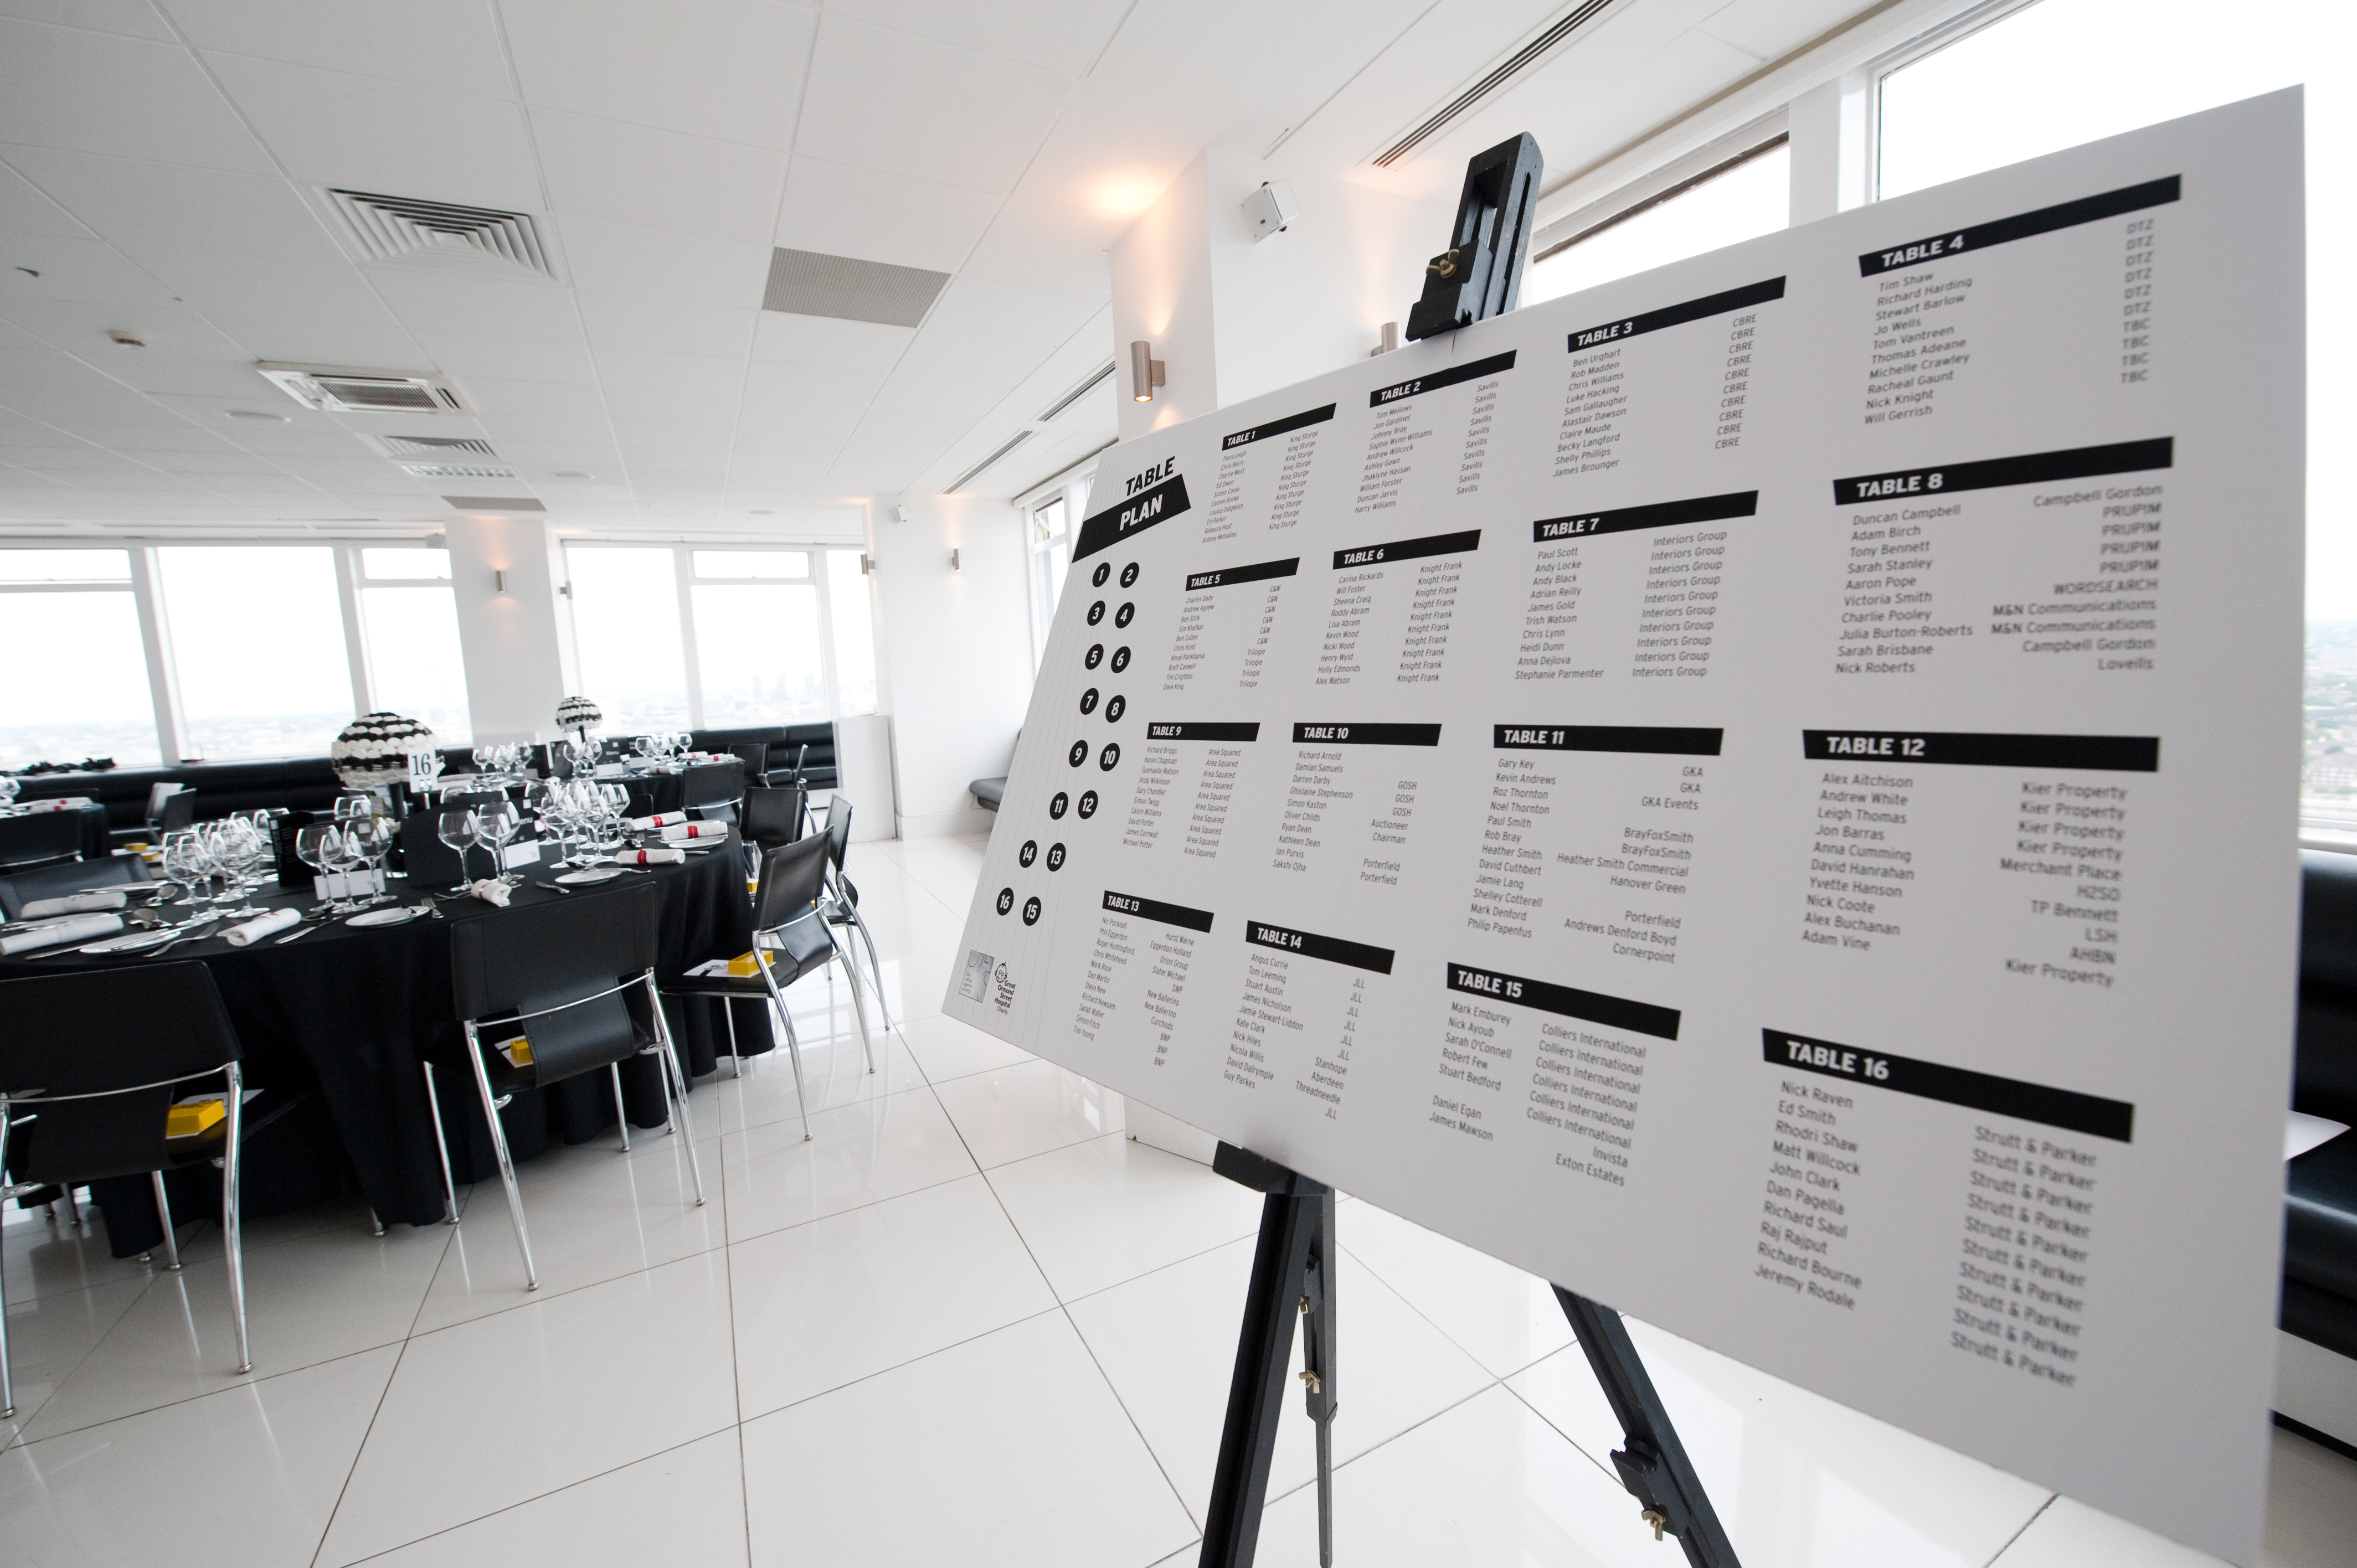 GOSH Charity Dinner Event | Table Plan